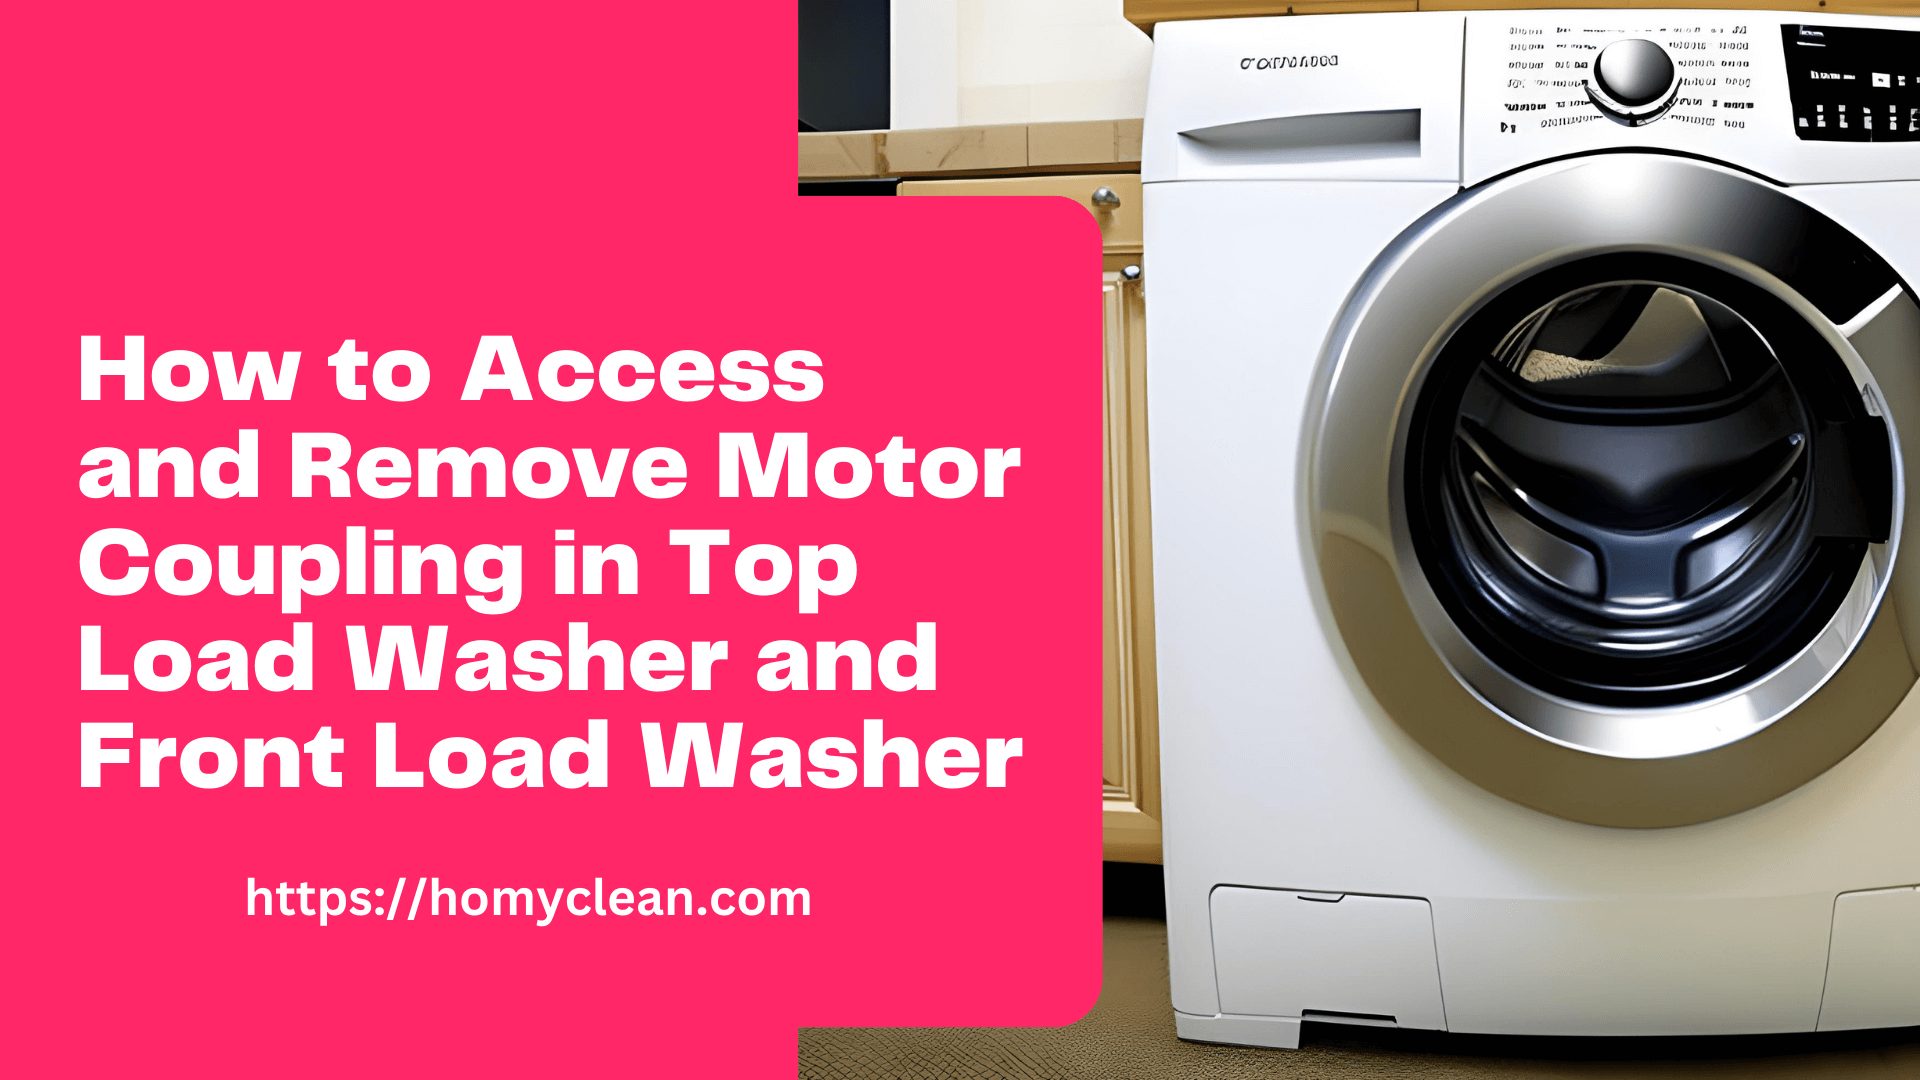 How to Access and Remove Motor Coupling in Top Load Washer and Front Load Washer